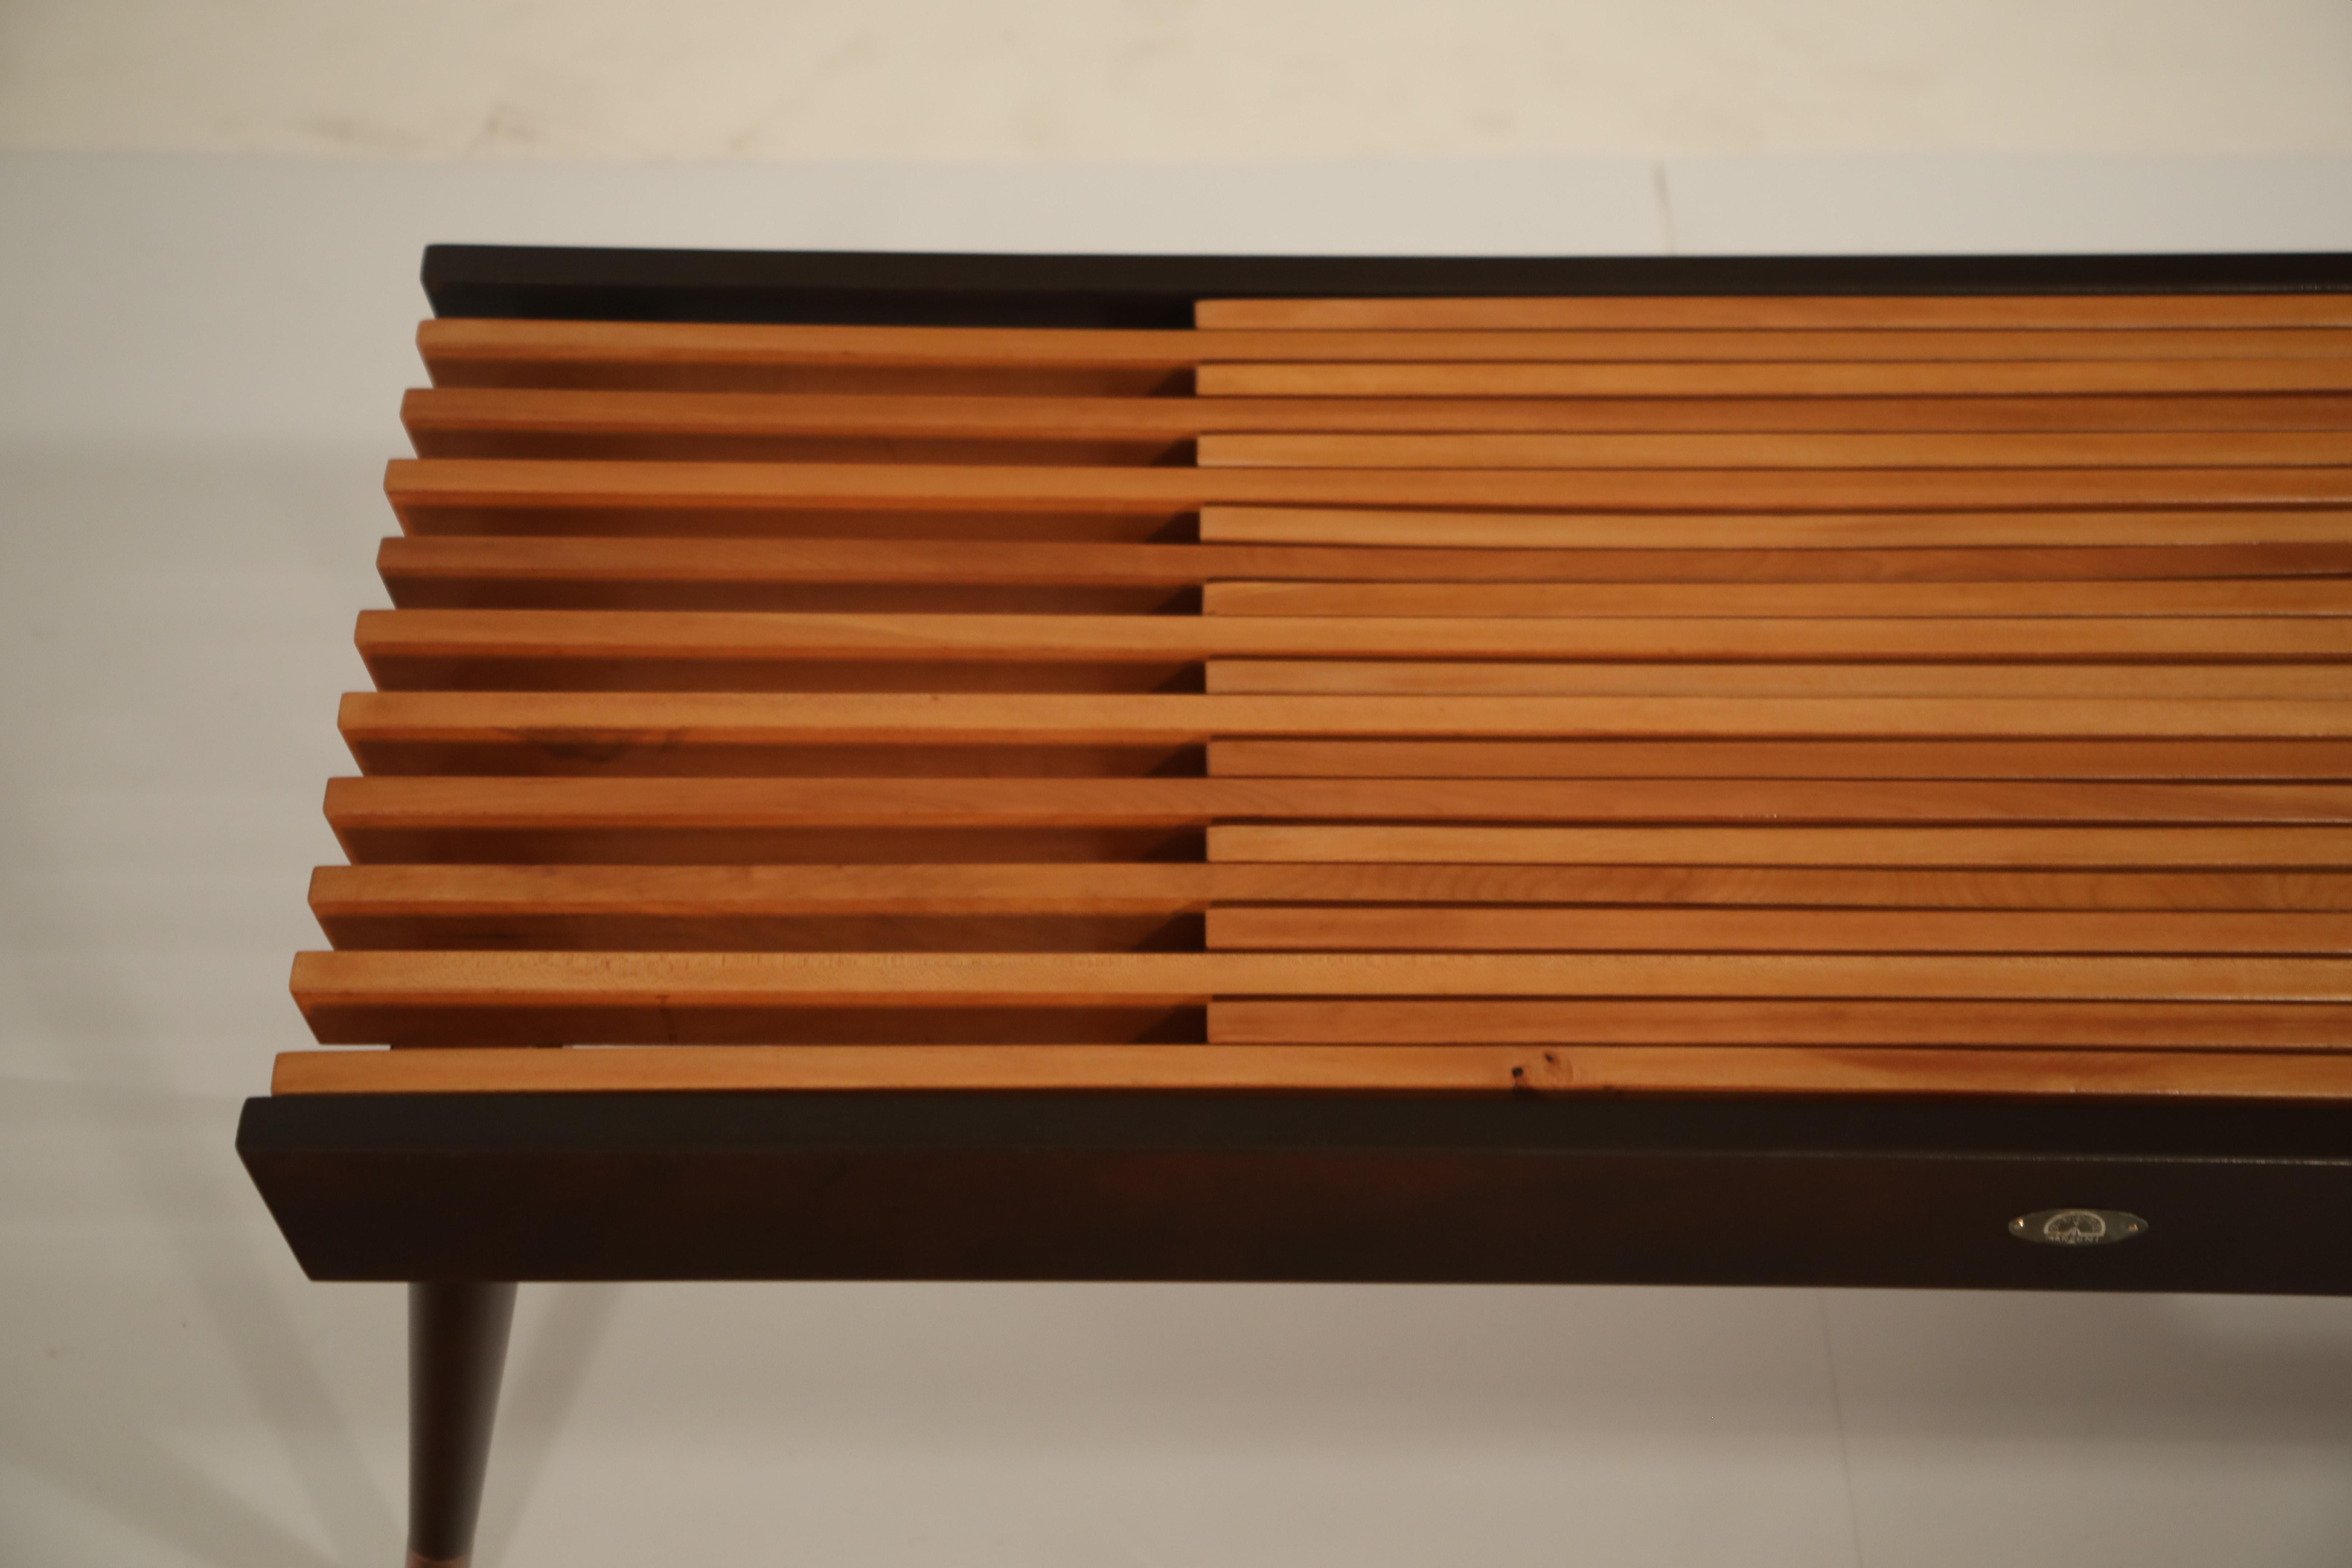 Extendable Slatted Wood Bench or Coffee Table by Maruni, 1950s Hiroshima Japan 6